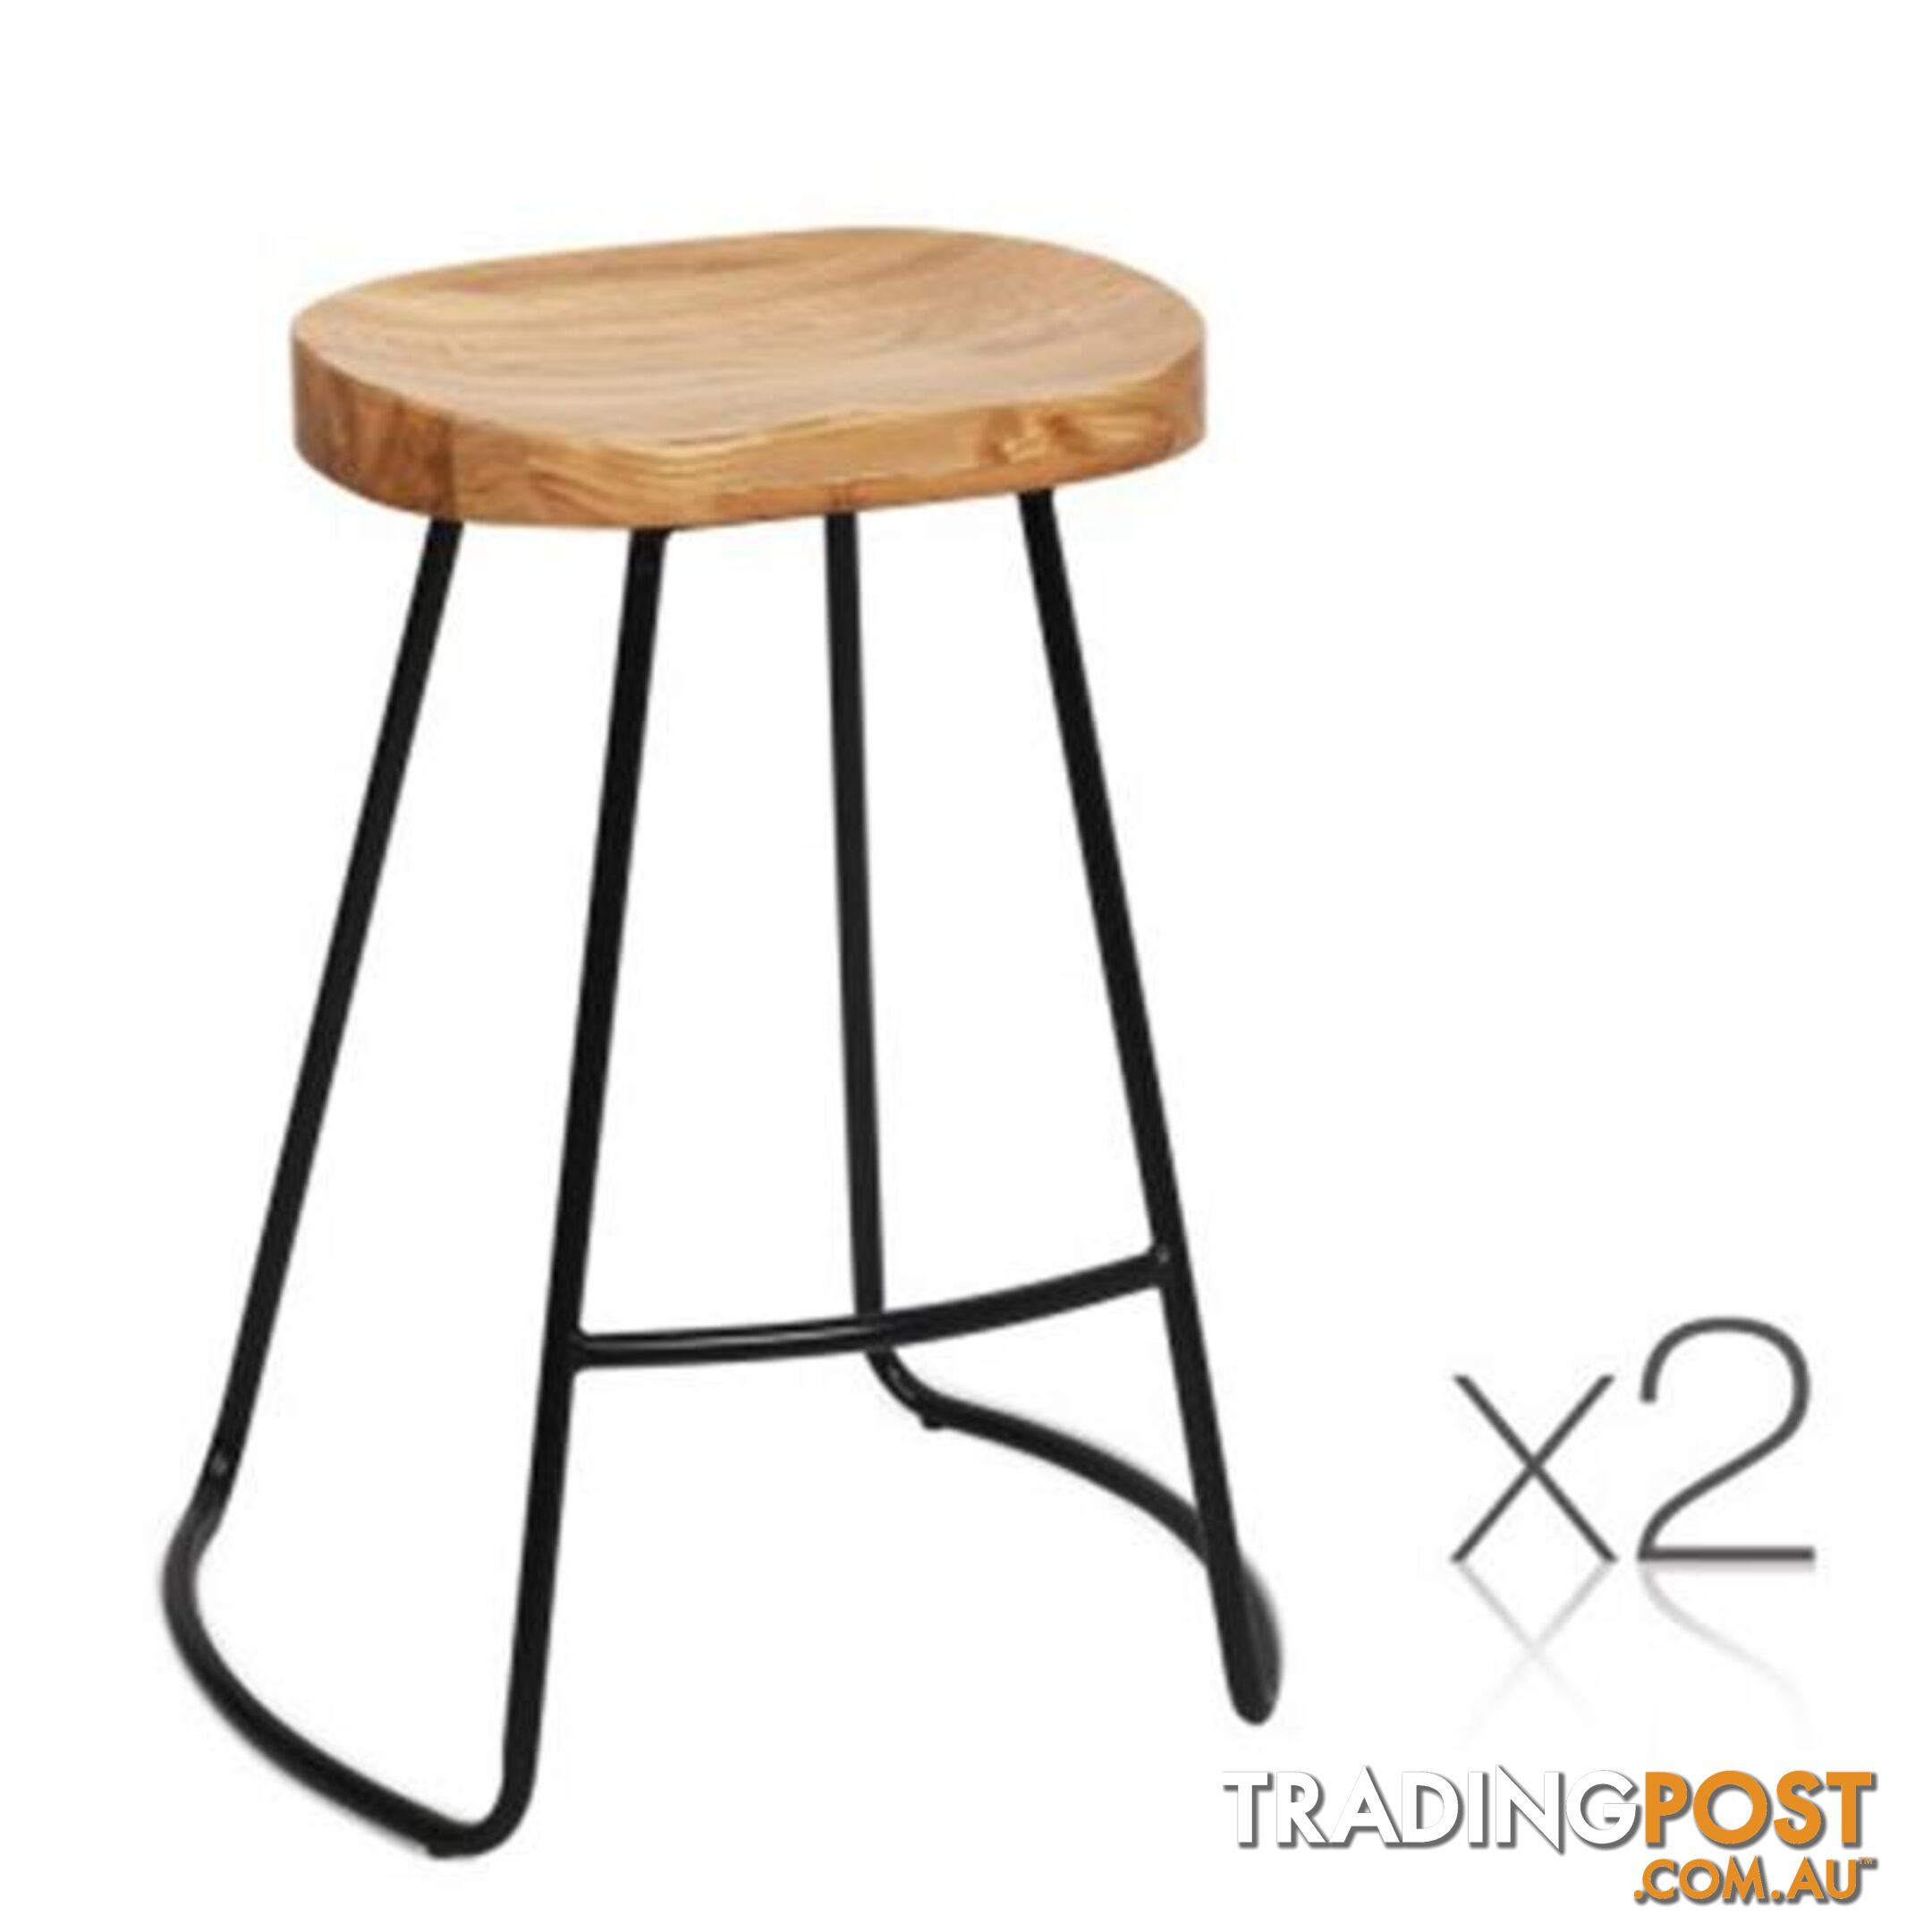 65 Cm Steel Bar Stools With Wooden Seat (Set of 2) - Artiss - 4344744397344